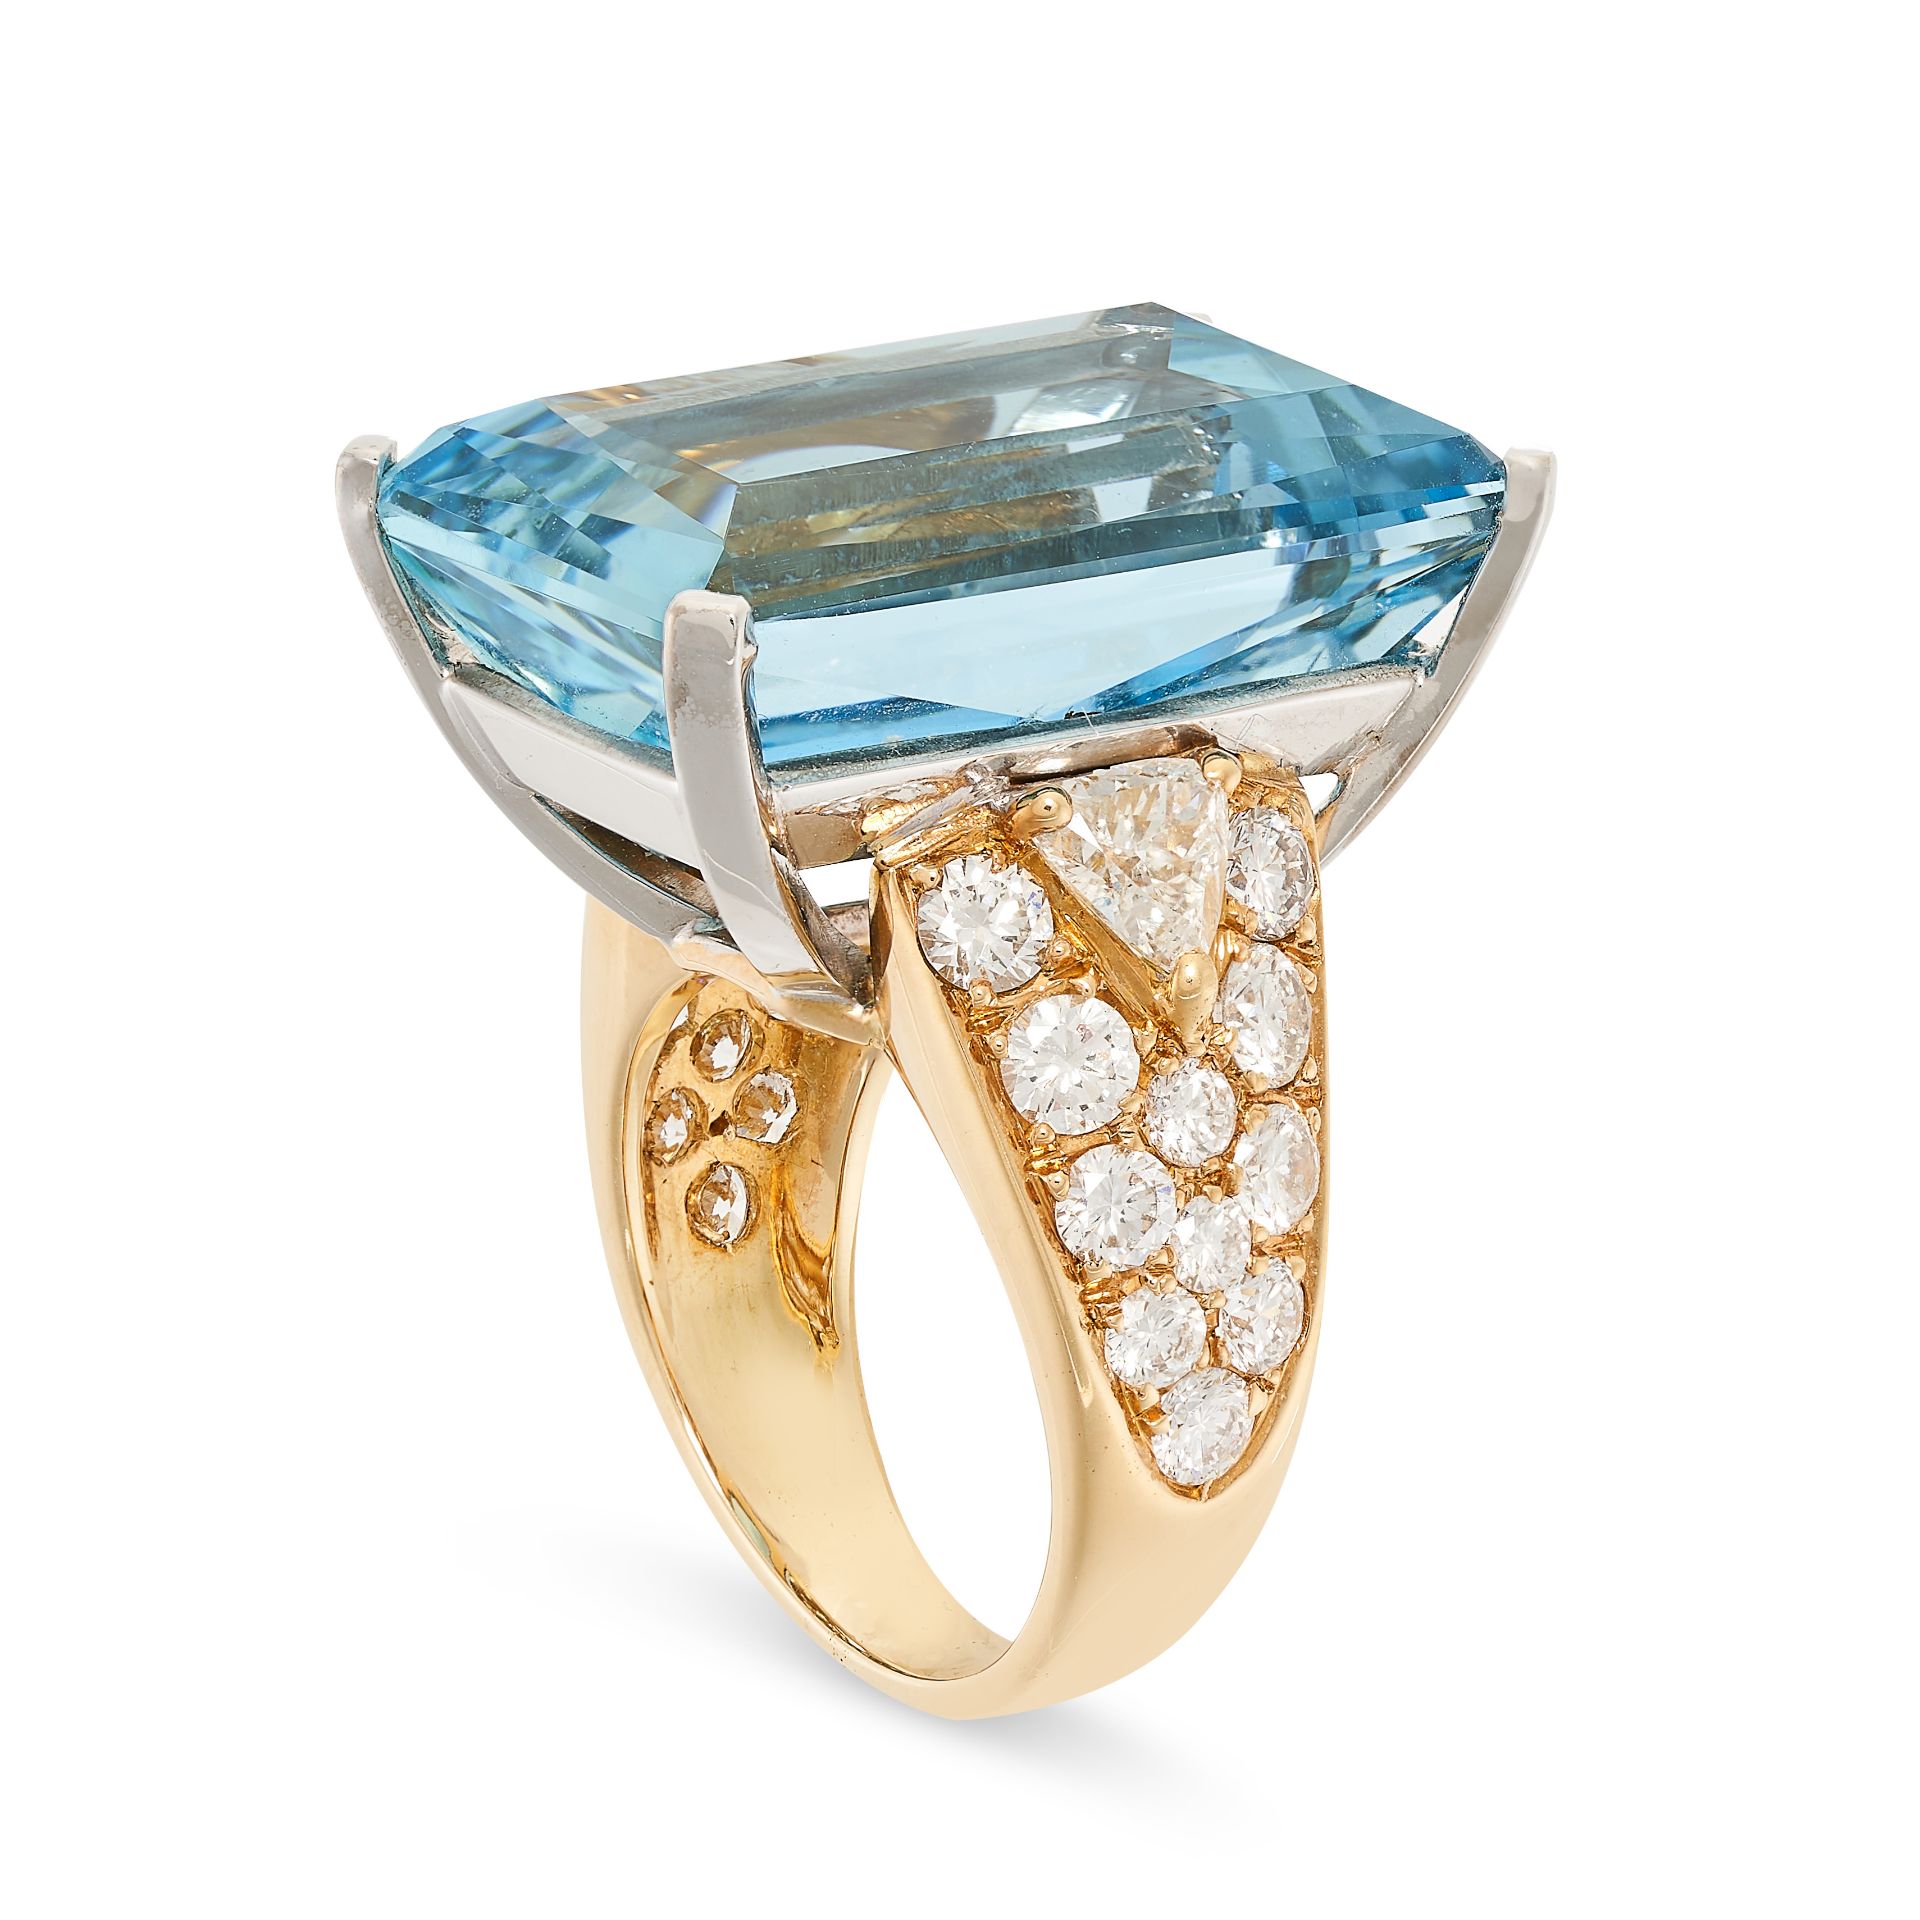 REPOSSI, A VINTAGE AQUAMARINE AND DIAMOND RING in 18ct yellow and white gold, set with a rectangular - Bild 2 aus 3